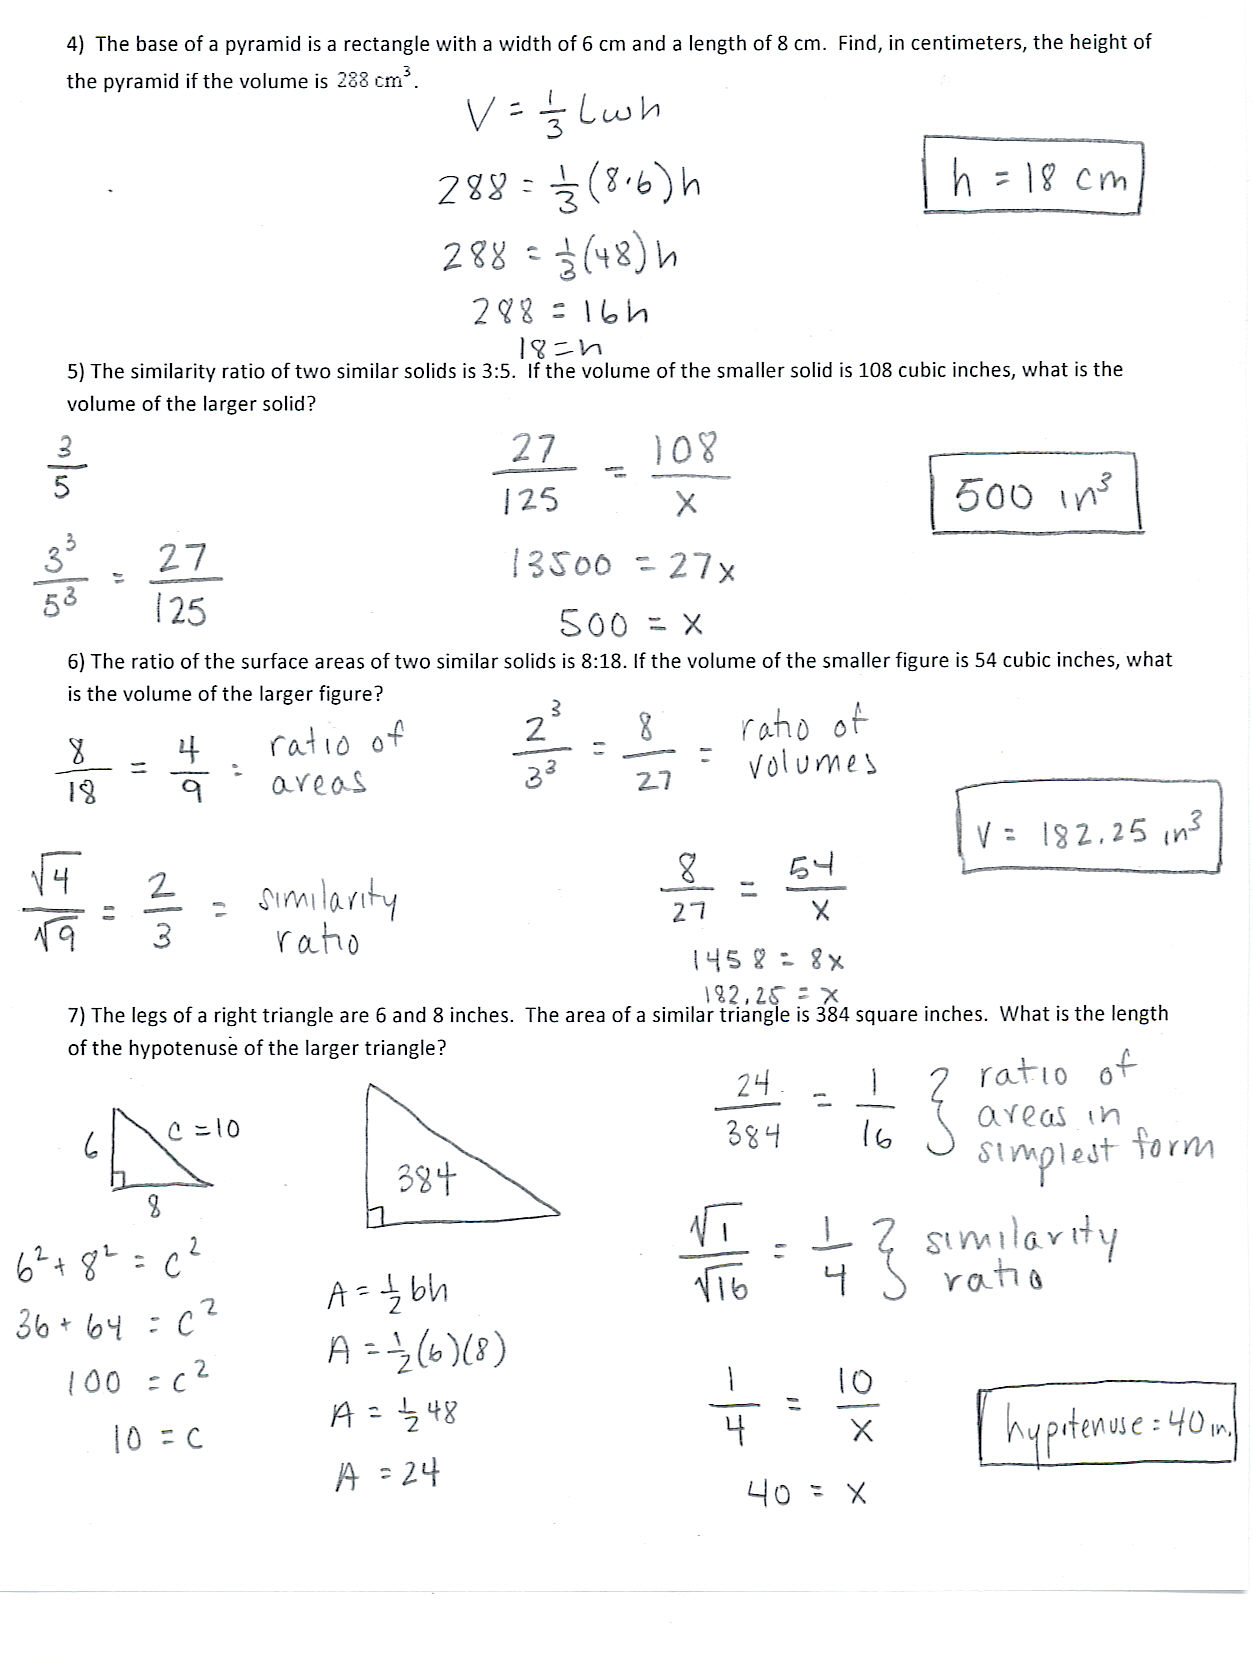 geometry-unit-11-volume-and-surface-area-answer-key